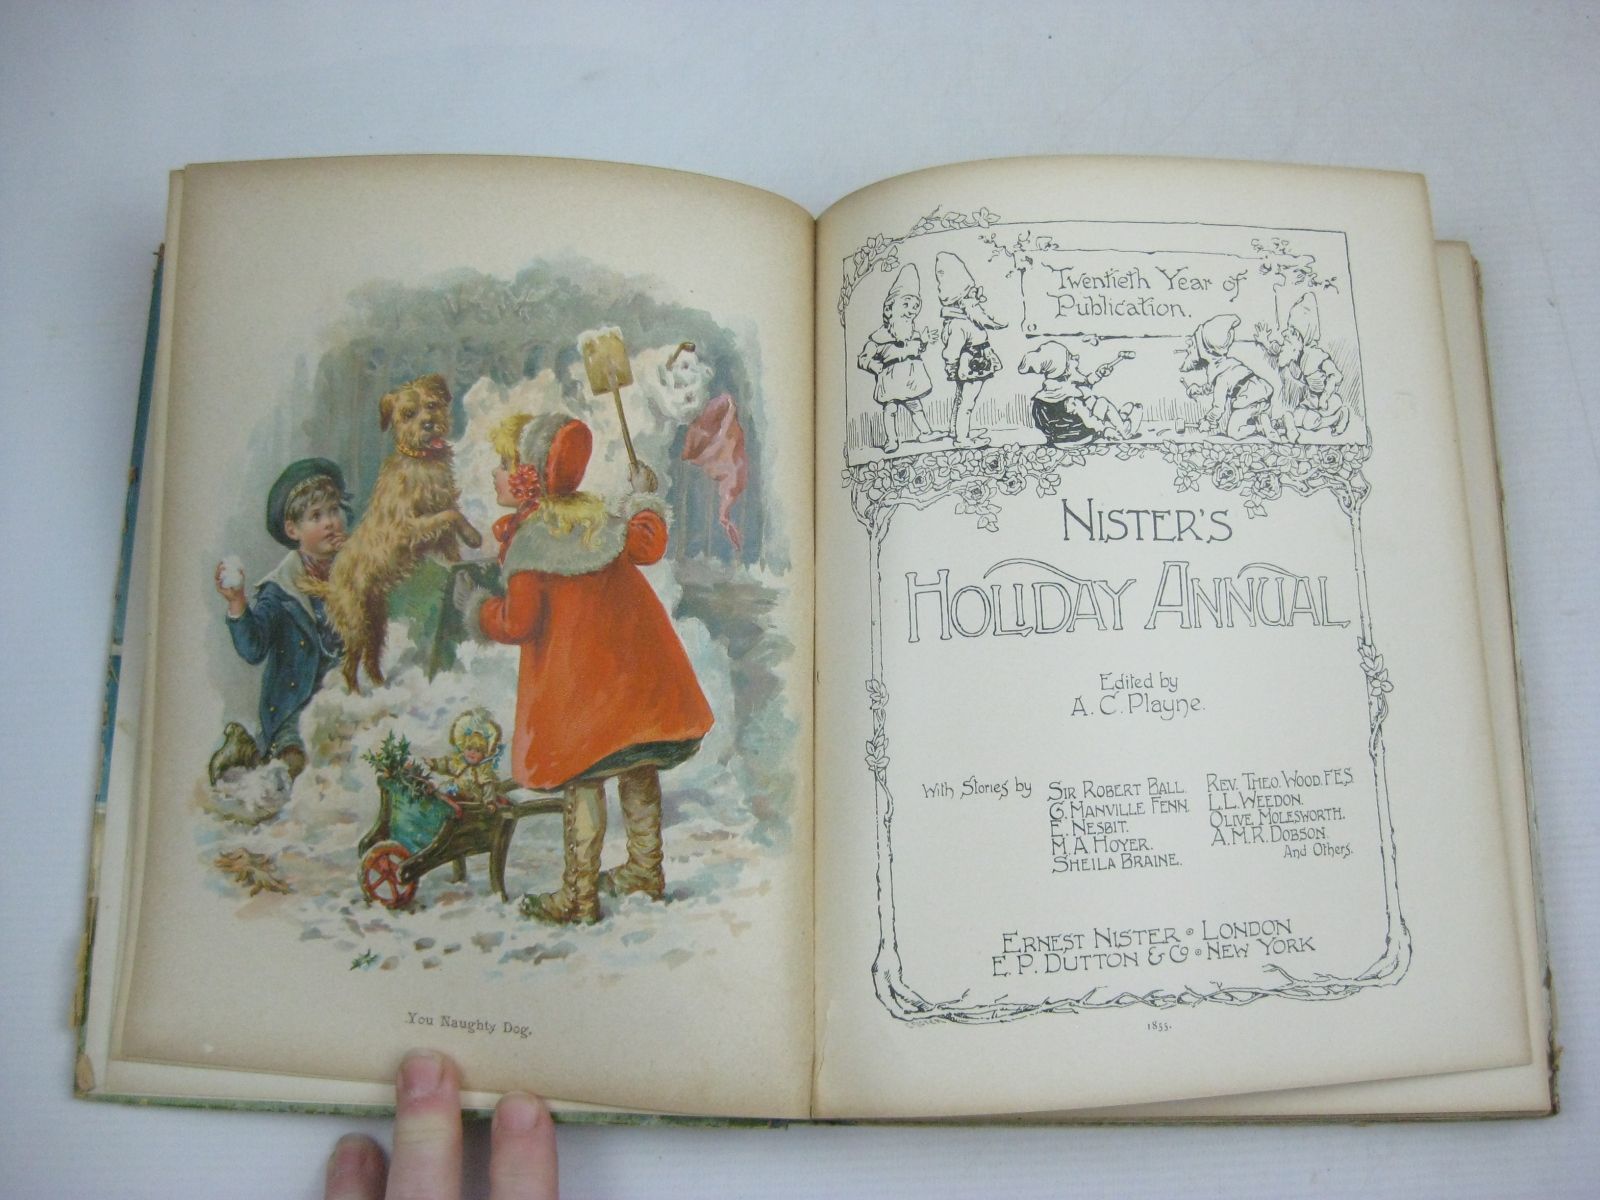 Photo of NISTER'S HOLIDAY ANNUAL - 20TH YEAR written by Fenn, George Manville
Nesbit, E.
Molesworth, Olive
Weedon, L.L.
et al, illustrated by Cubitt, Edith A.
Jackson, A.E.
Nister, Ernest published by Ernest Nister (STOCK CODE: 1404902)  for sale by Stella & Rose's Books